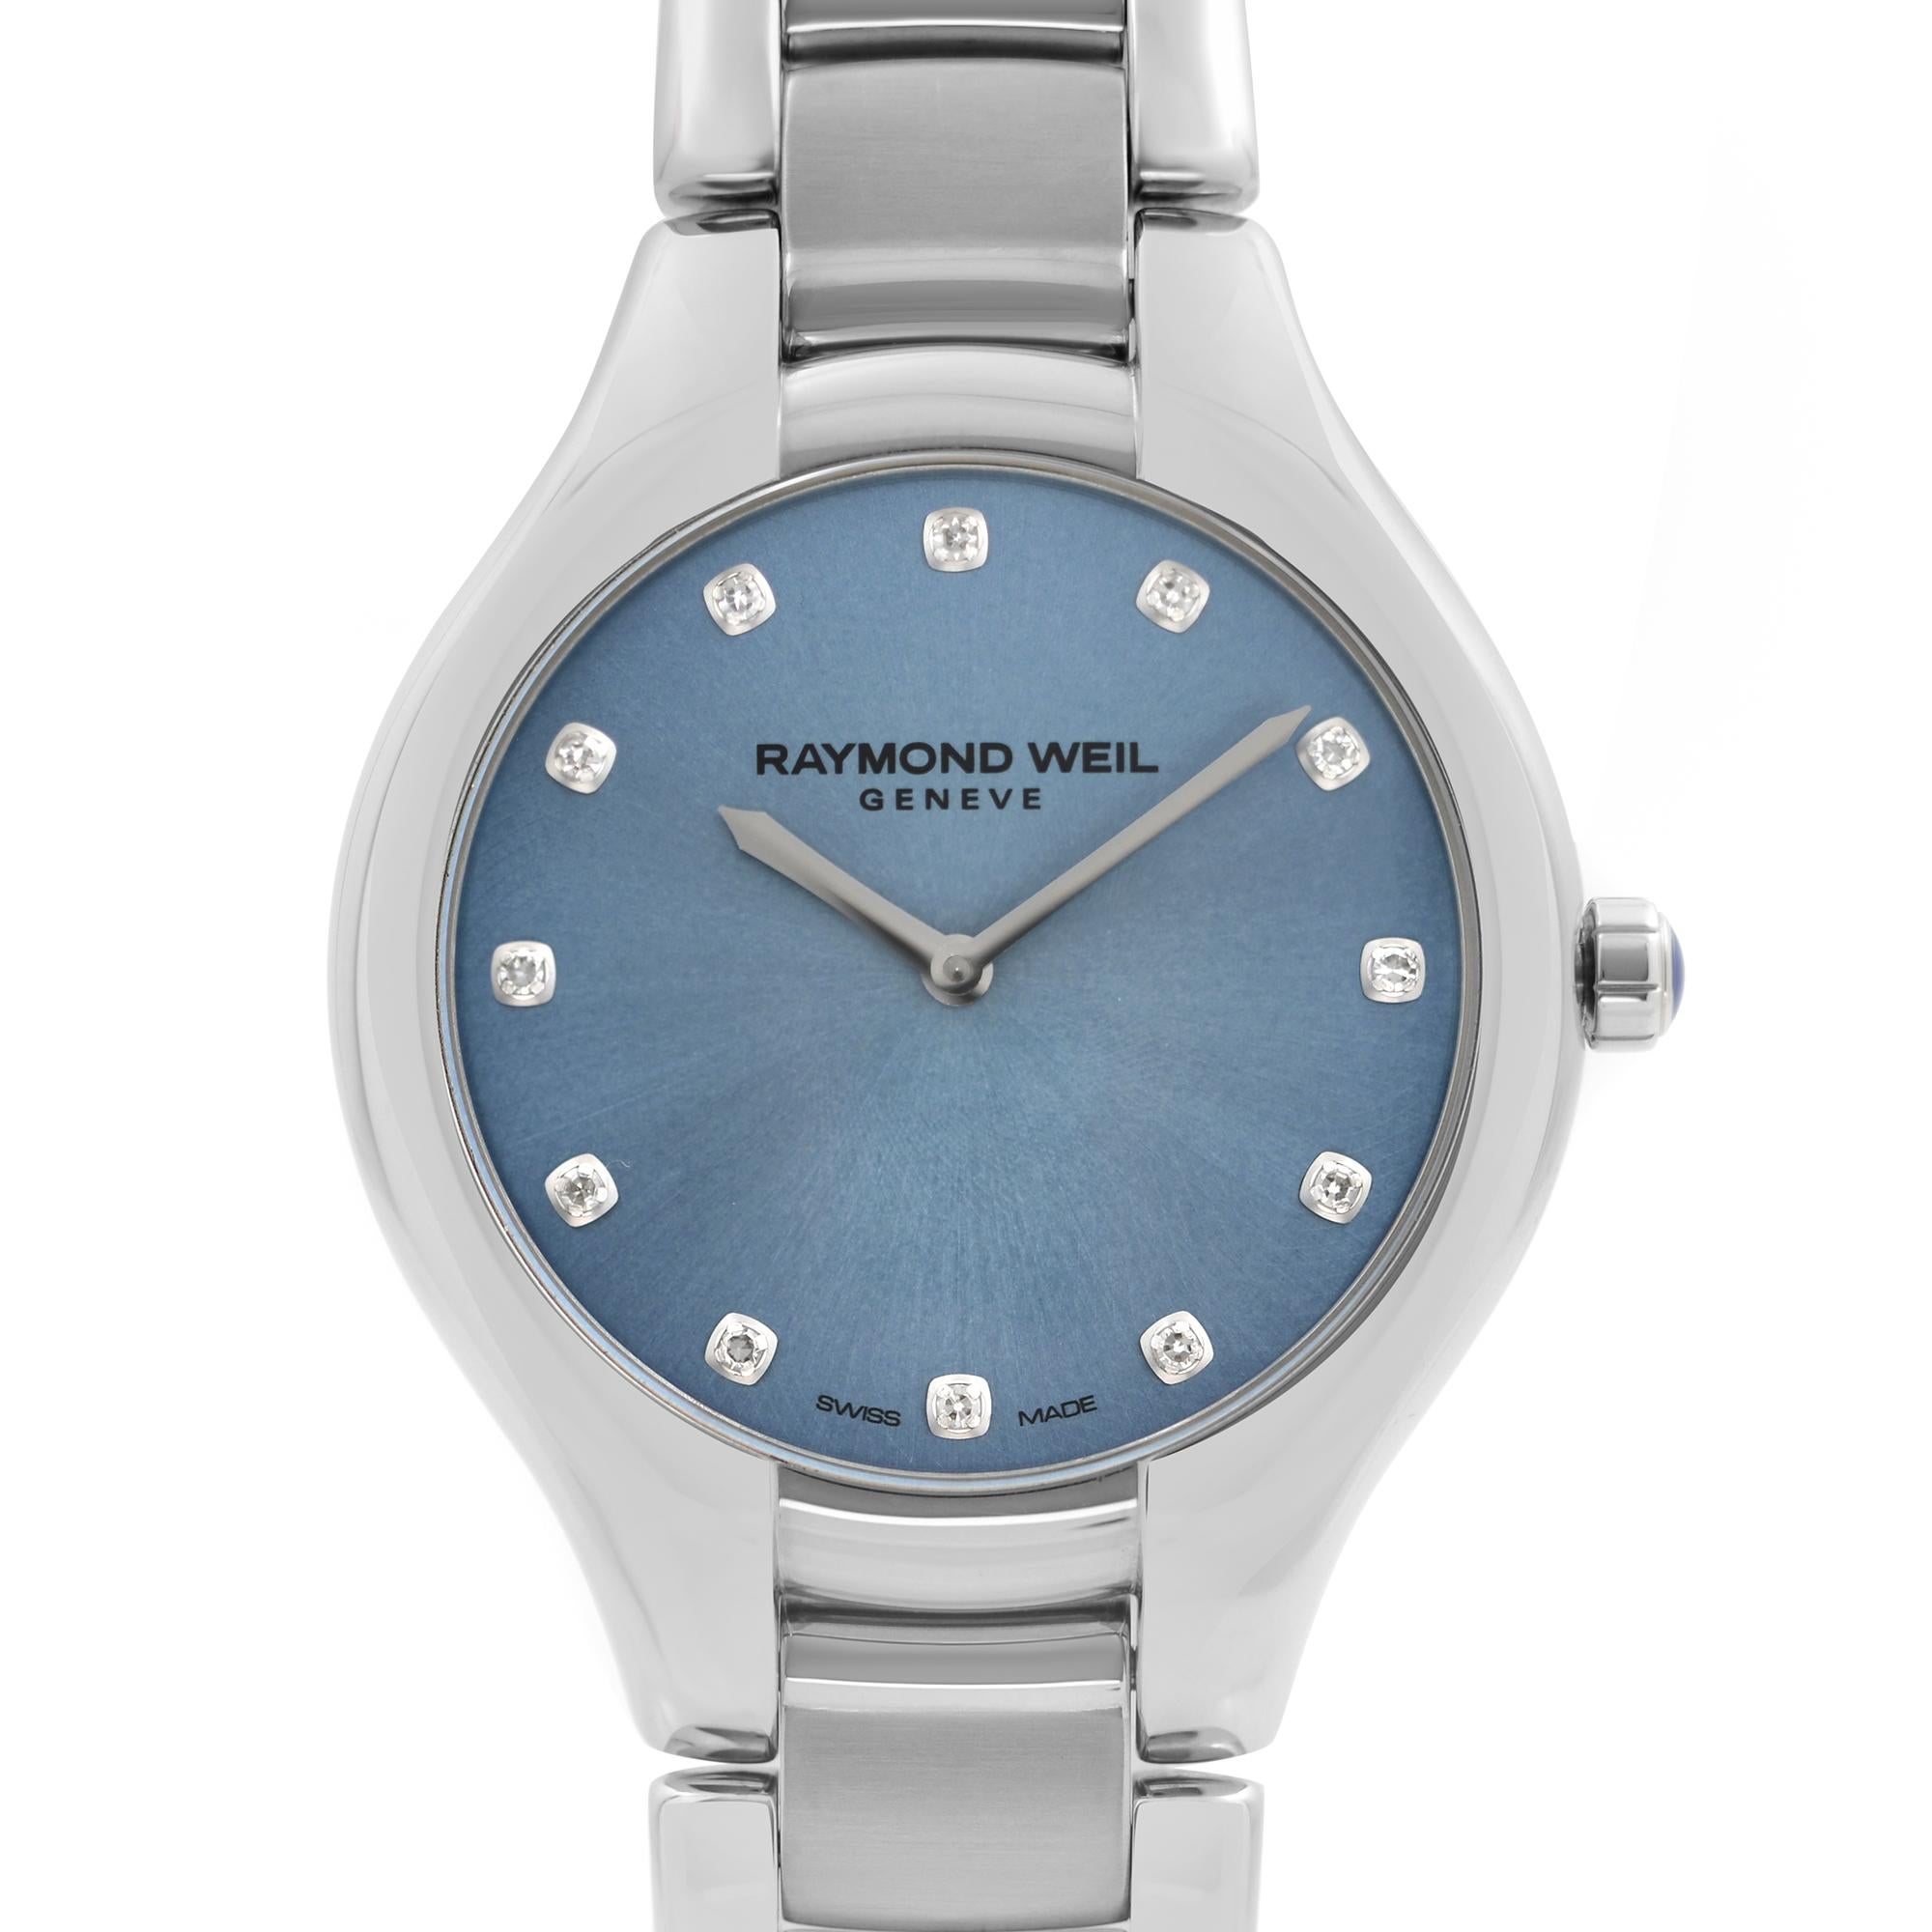 Never Worn Raymond Weil Noemia Stainless Steel Blue Diamond Dial Ladies Watch 5132-ST-50081. This Beautiful Timepiece Features: Stainless Steel Case and Bracelet, Fixed Stainless Steel Bezel, Blue Dial with Silver-Tone Hands, And Diamond Hour